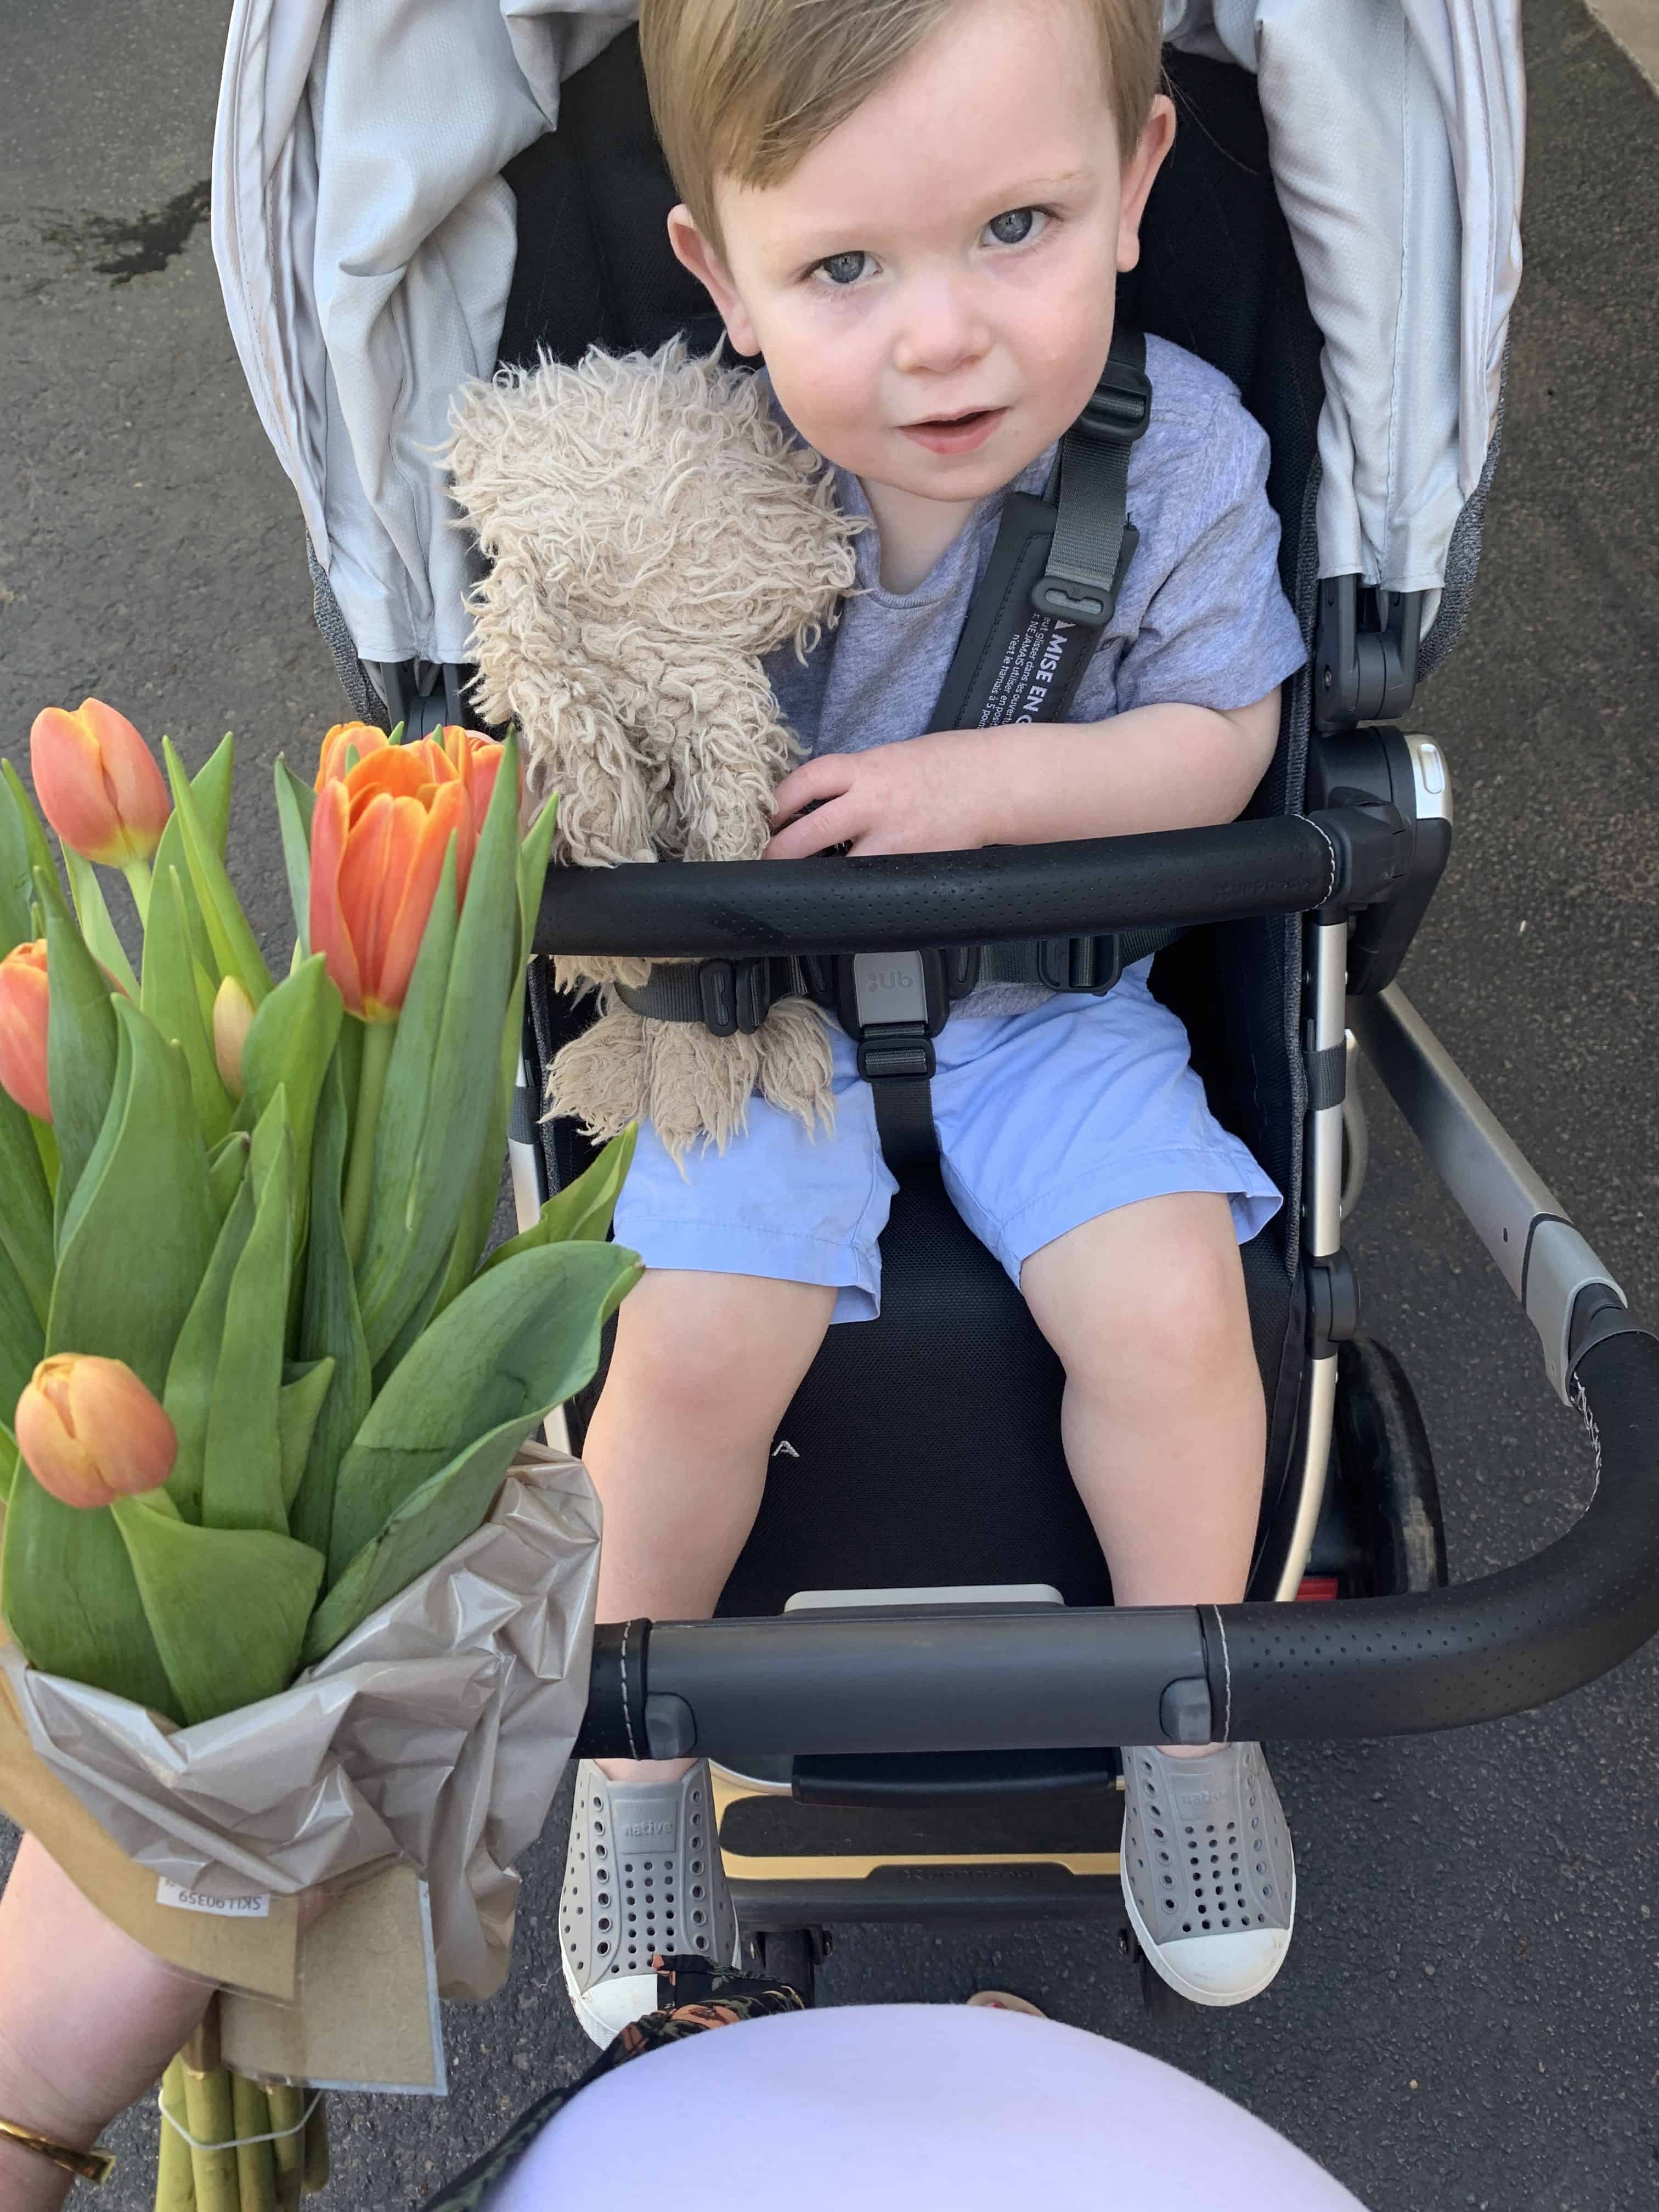 Toddler sitting in UPPAbaby VISTA stroller with stuffed animal